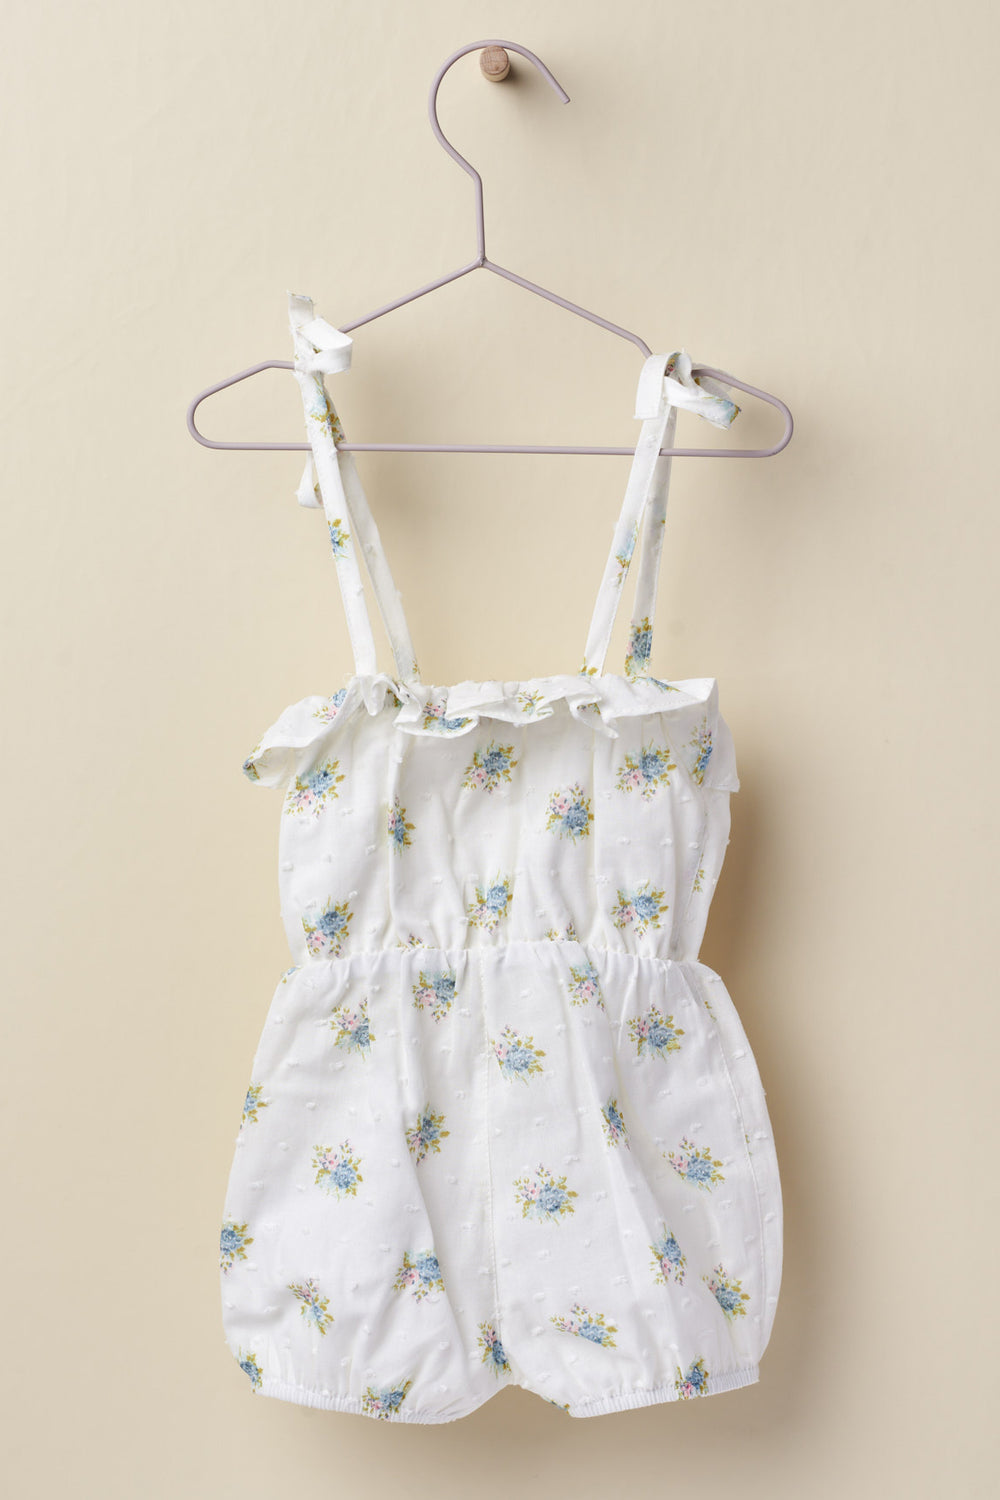 Wedoble "Lettie" Soft Blue Floral Playsuit | Millie and John